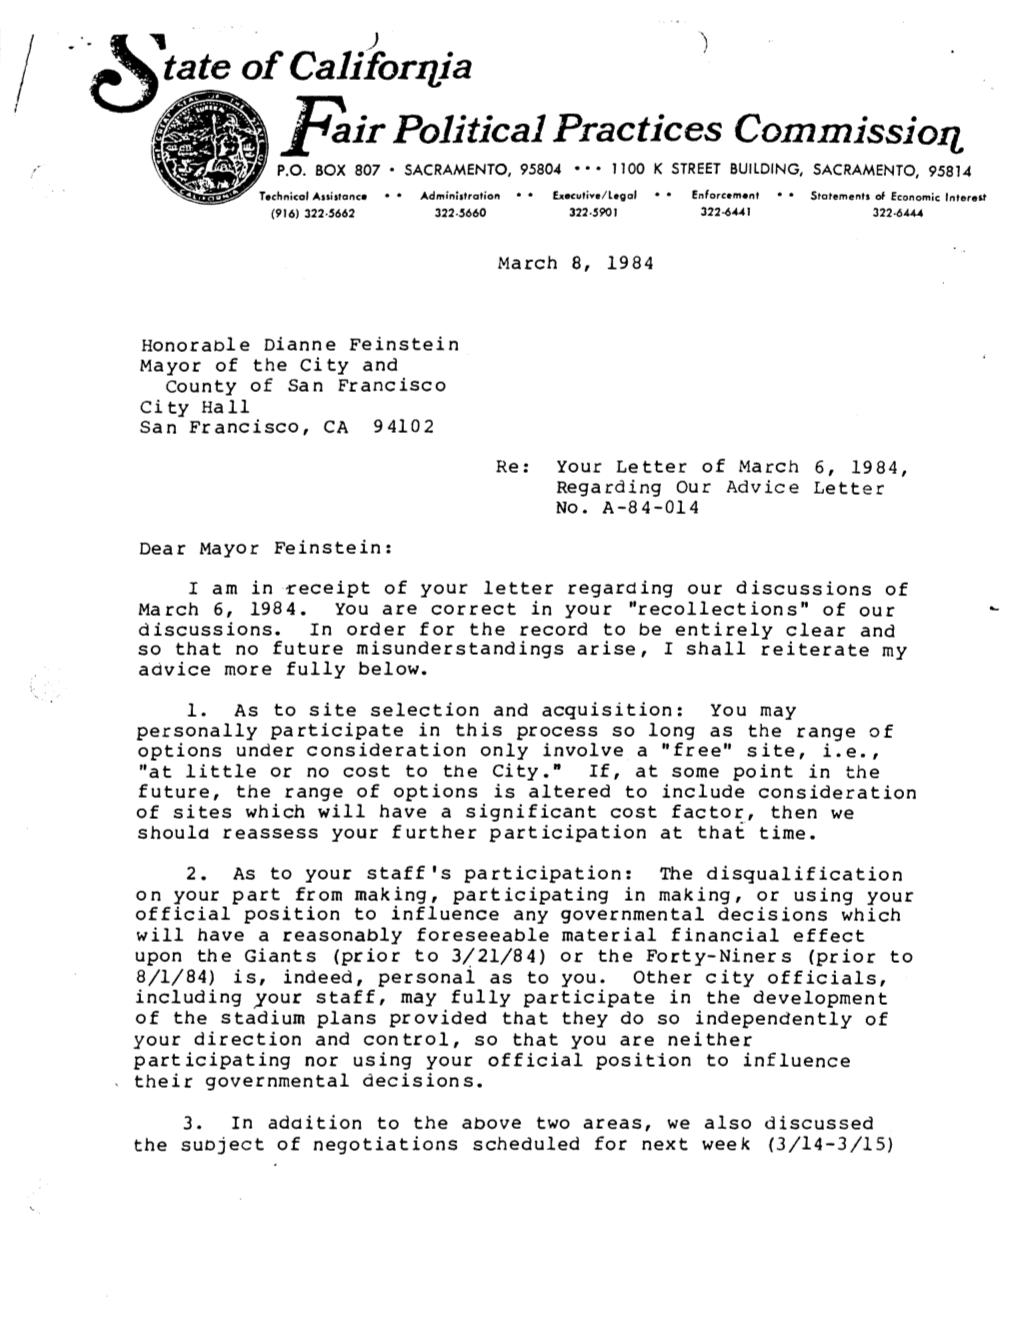 1984014 Advice Letter # 84014-A